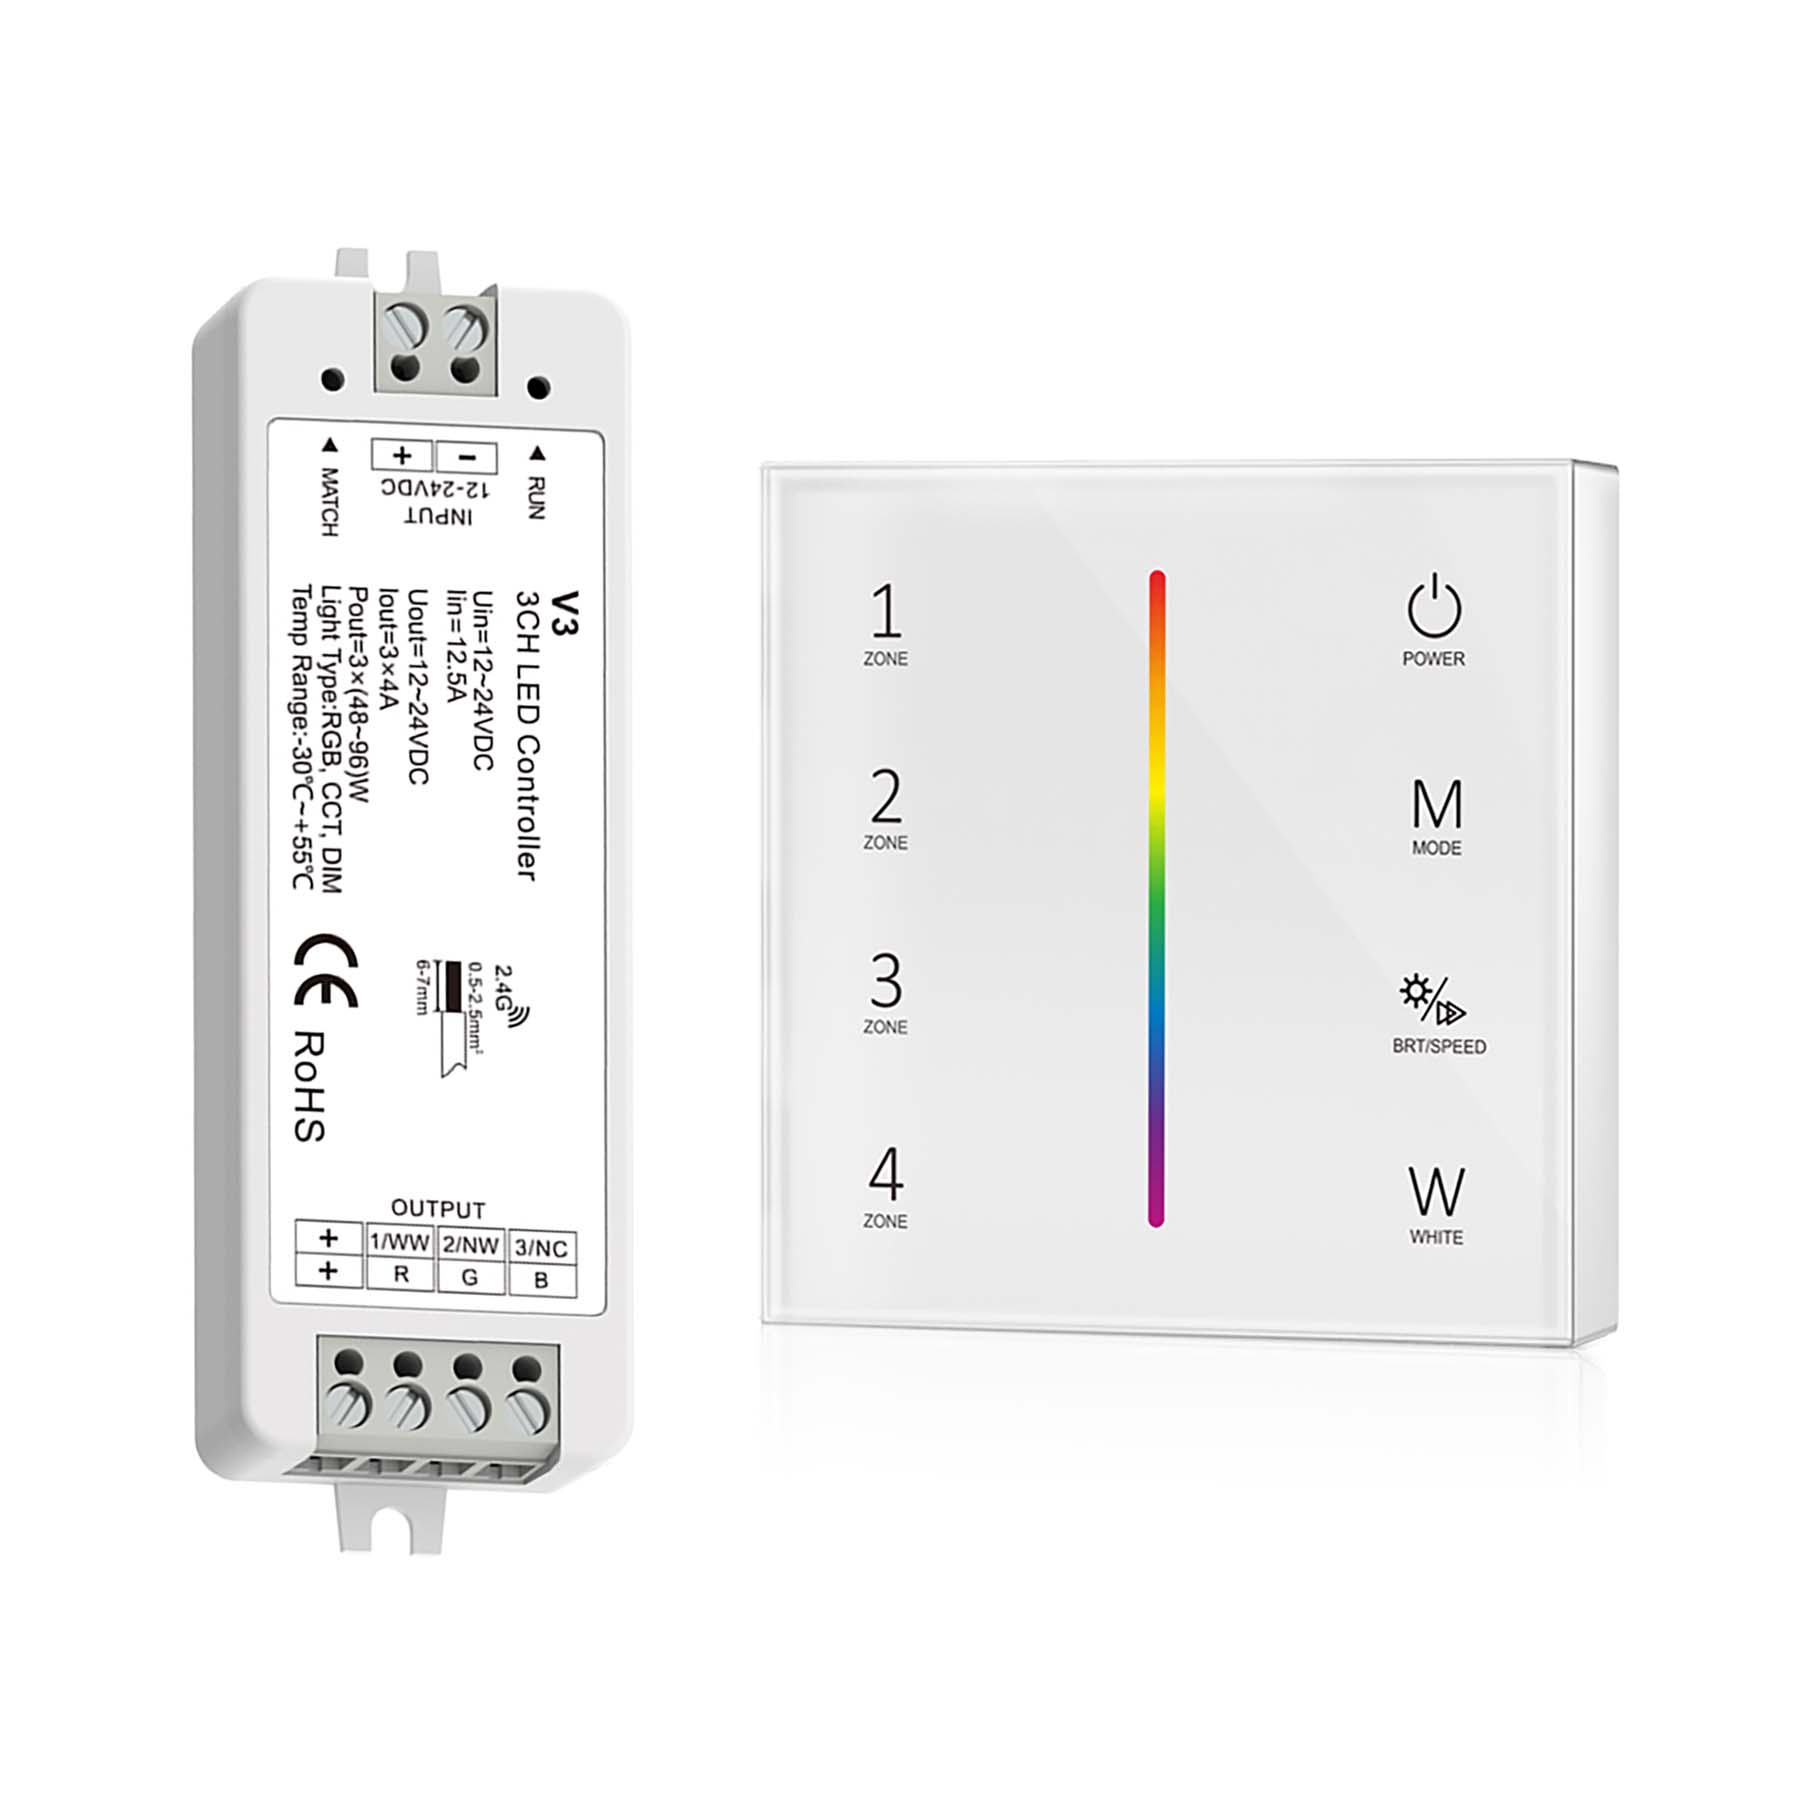 G.W.S. LED LED 12-24V DC RGB/RGBW Controller V3 + 4 Zone Panel Remote Control 2*AAA Battery T24